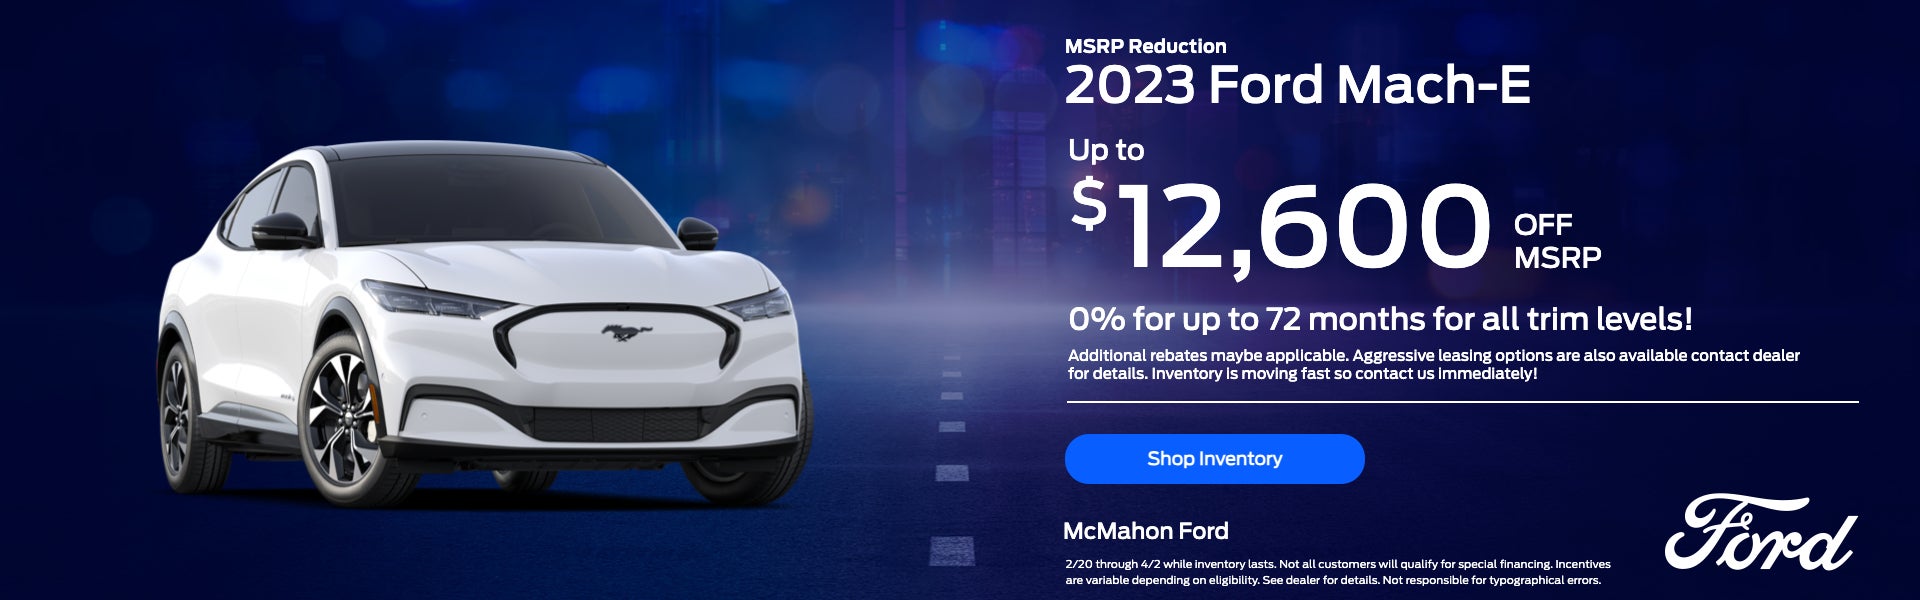 2023 Ford Mach-E MSRP Reduction